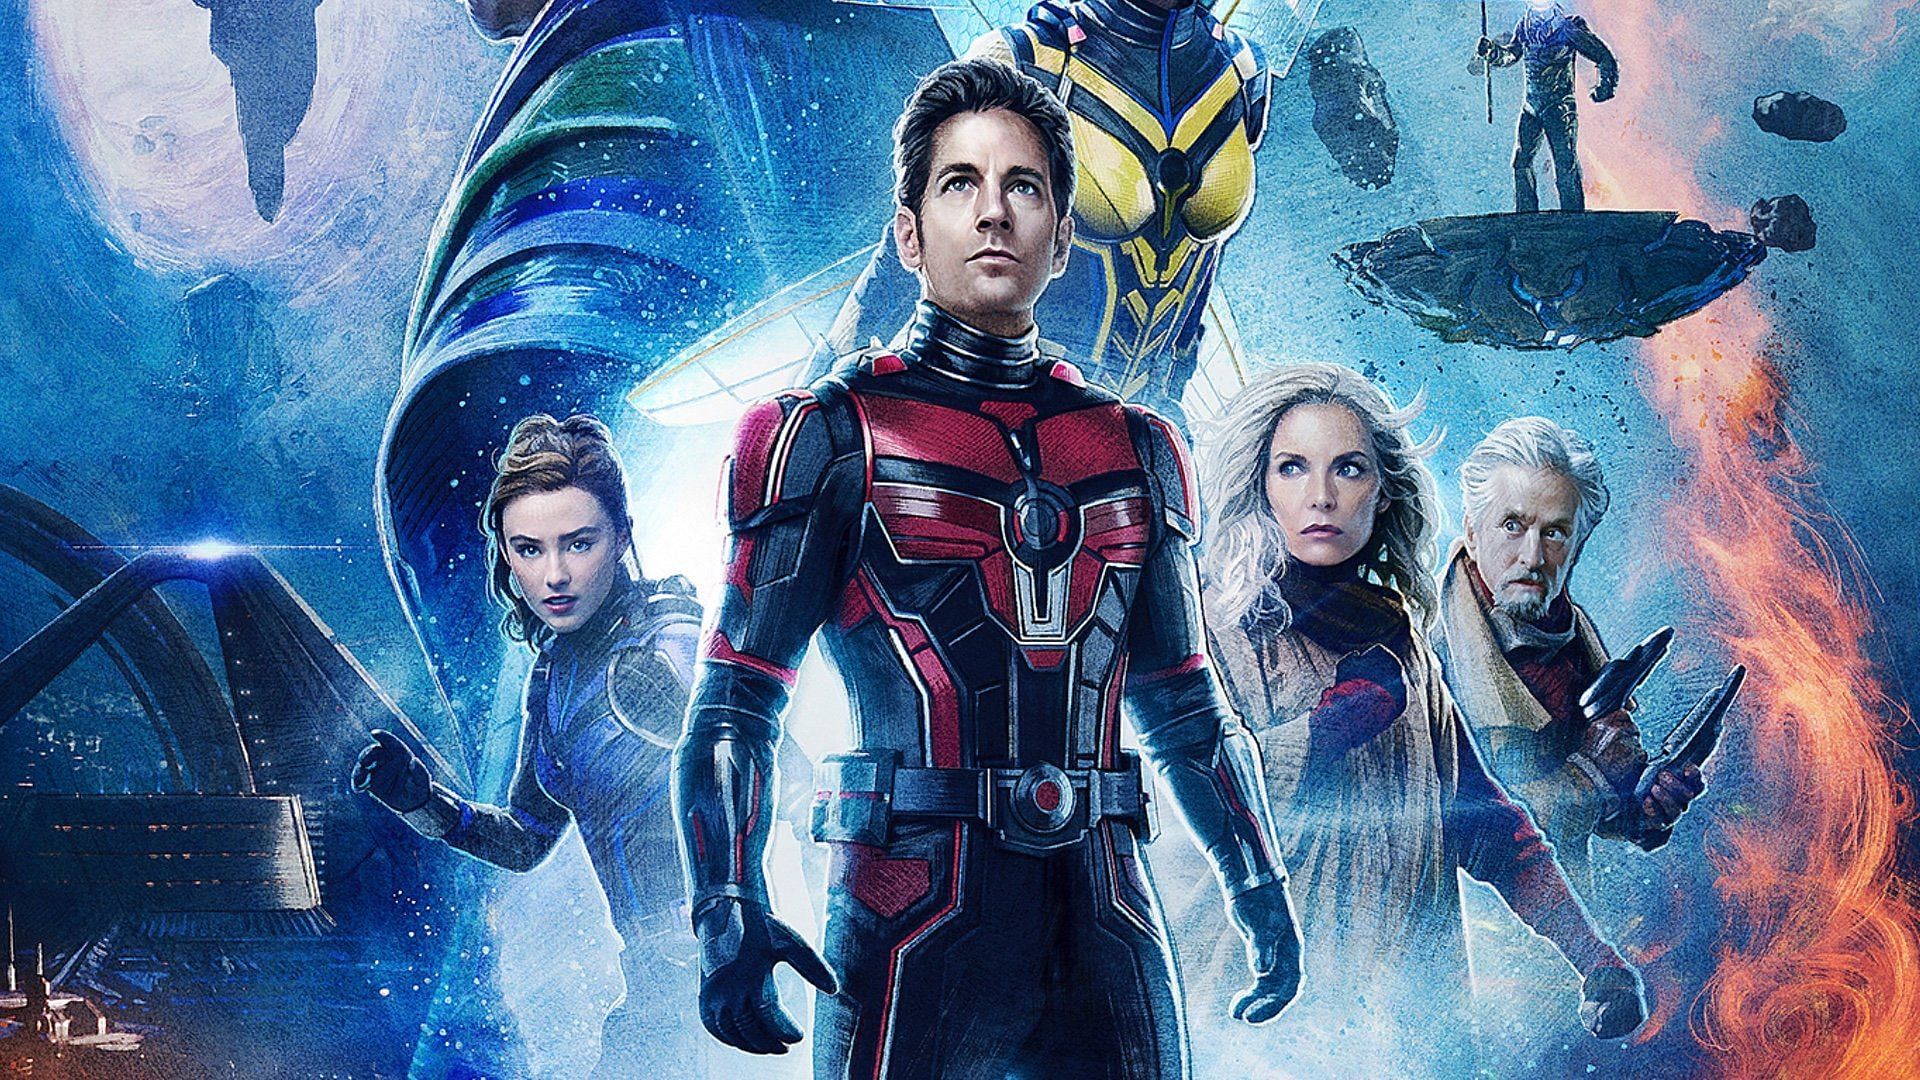 Ant-Man and the Wasp: Quantumania marks the third chapter in the Ant-Man movie series (Image via Marvel)